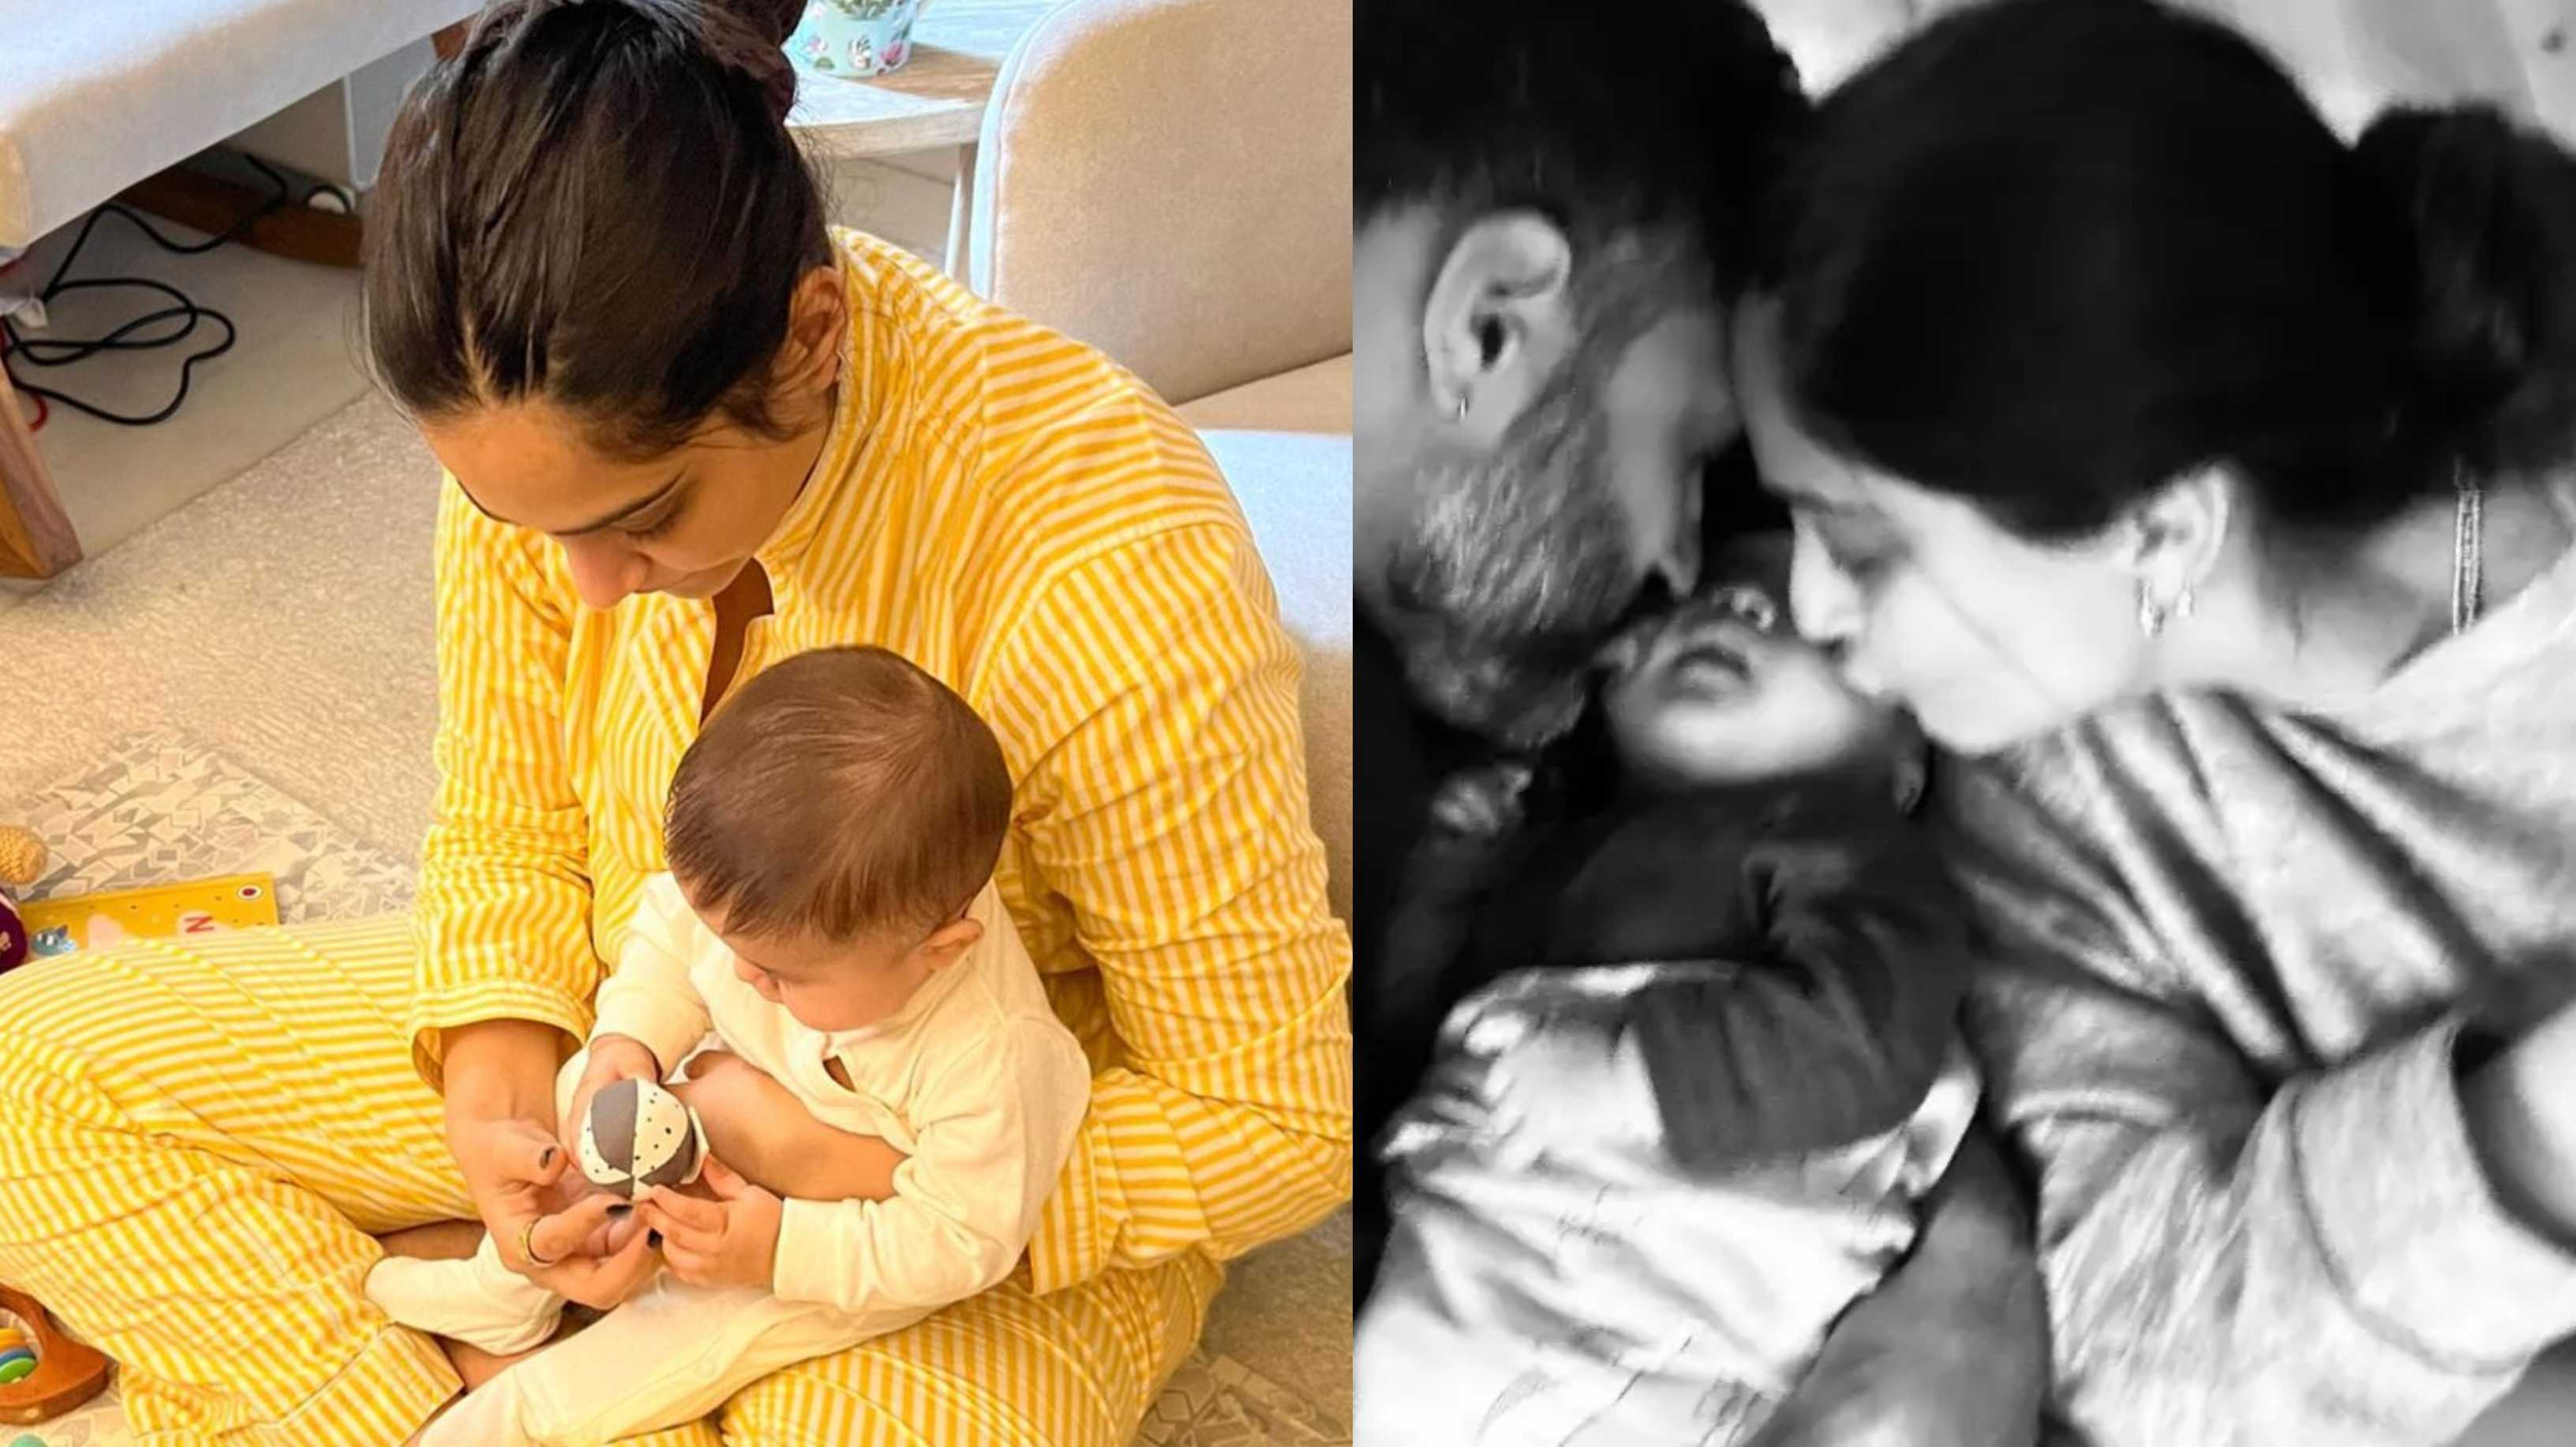 Sonam Kapoor Ahuja shares glimpse of son Vayu as he turns 6 months old; his little kurta pajama is beyond adorable